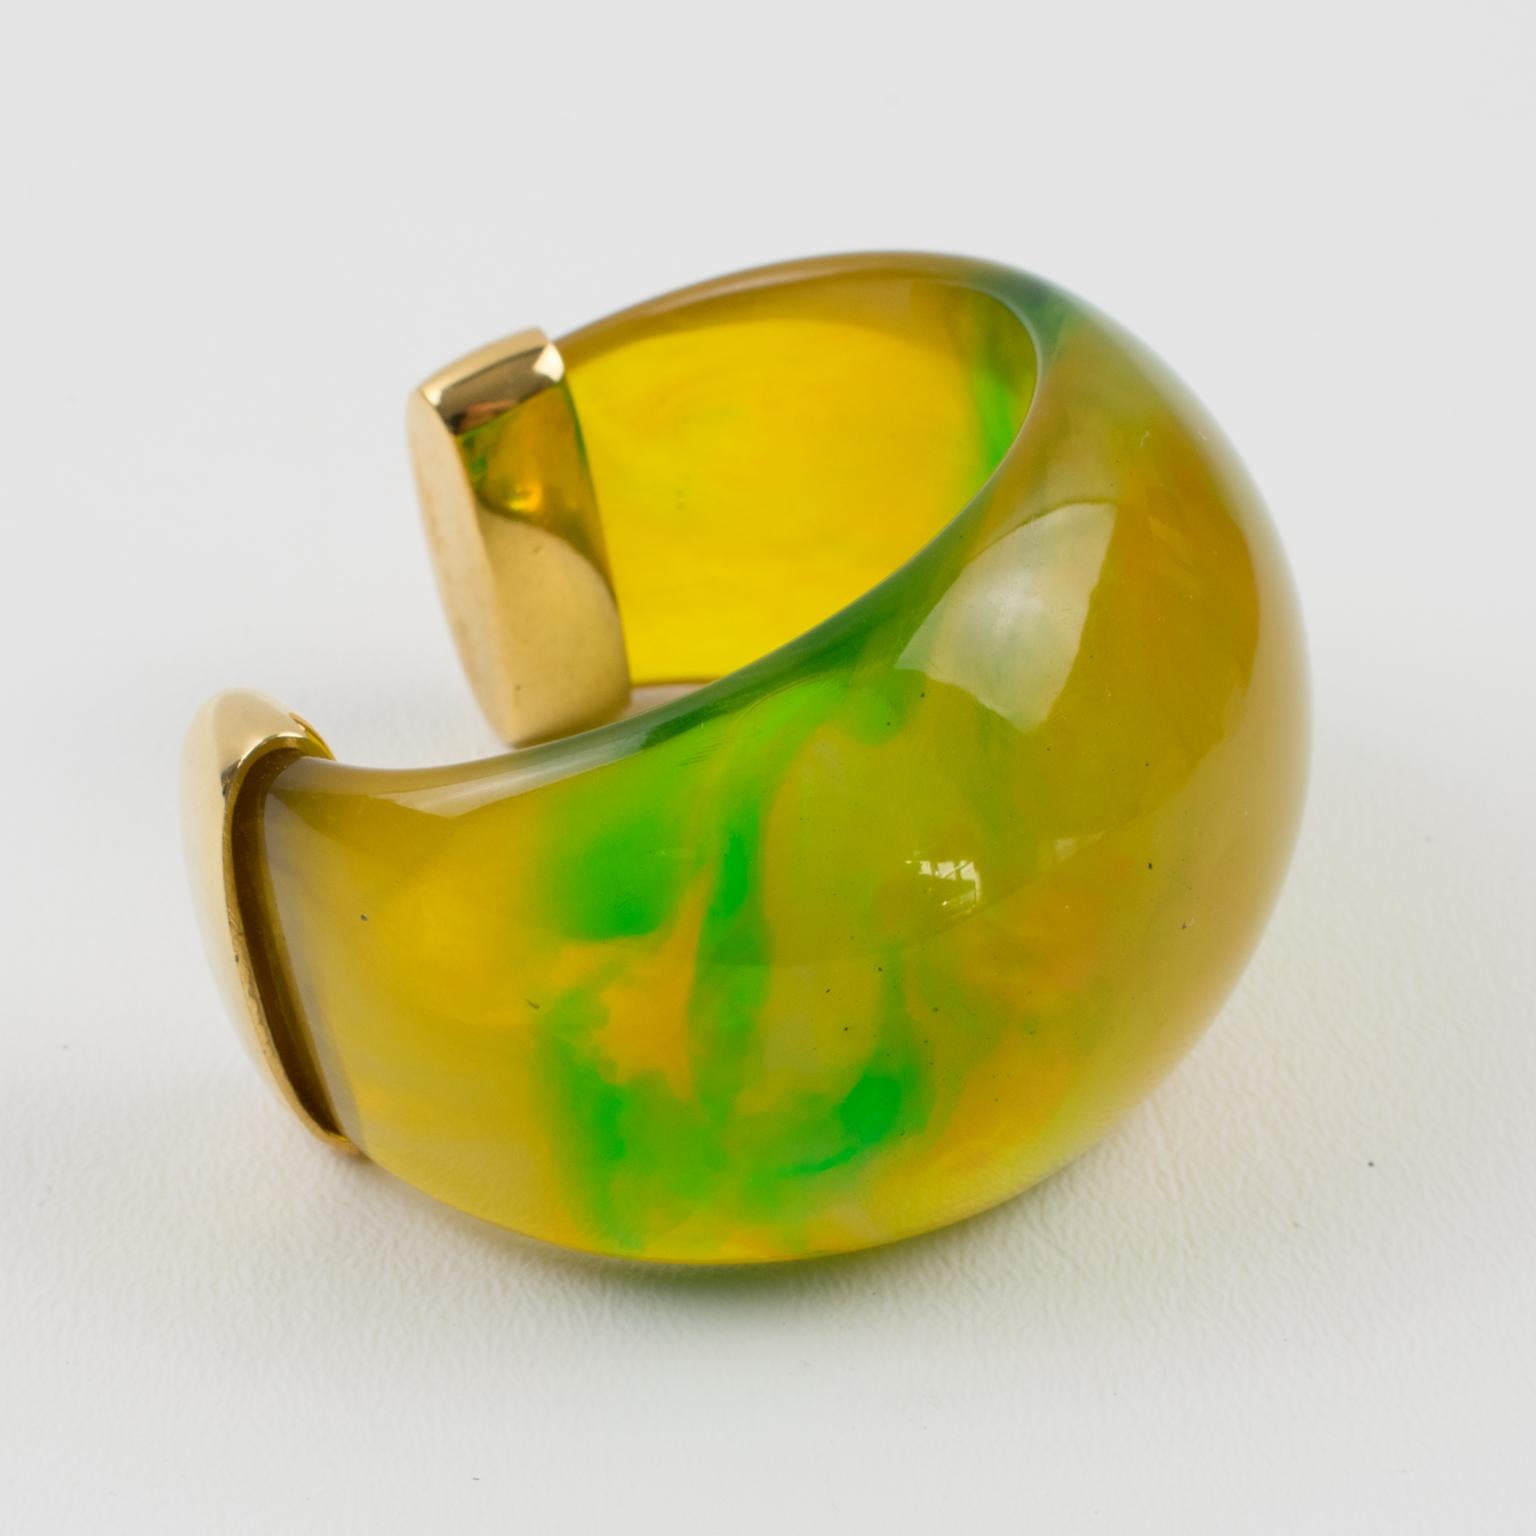 This exquisite Yves Saint Laurent YSL Paris bracelet bangle features a chunky design with a heavily domed cuff shape in translucent squash yellow marbled with green grass and tangerine orange swirling colors finished with gilt metal hardware. The